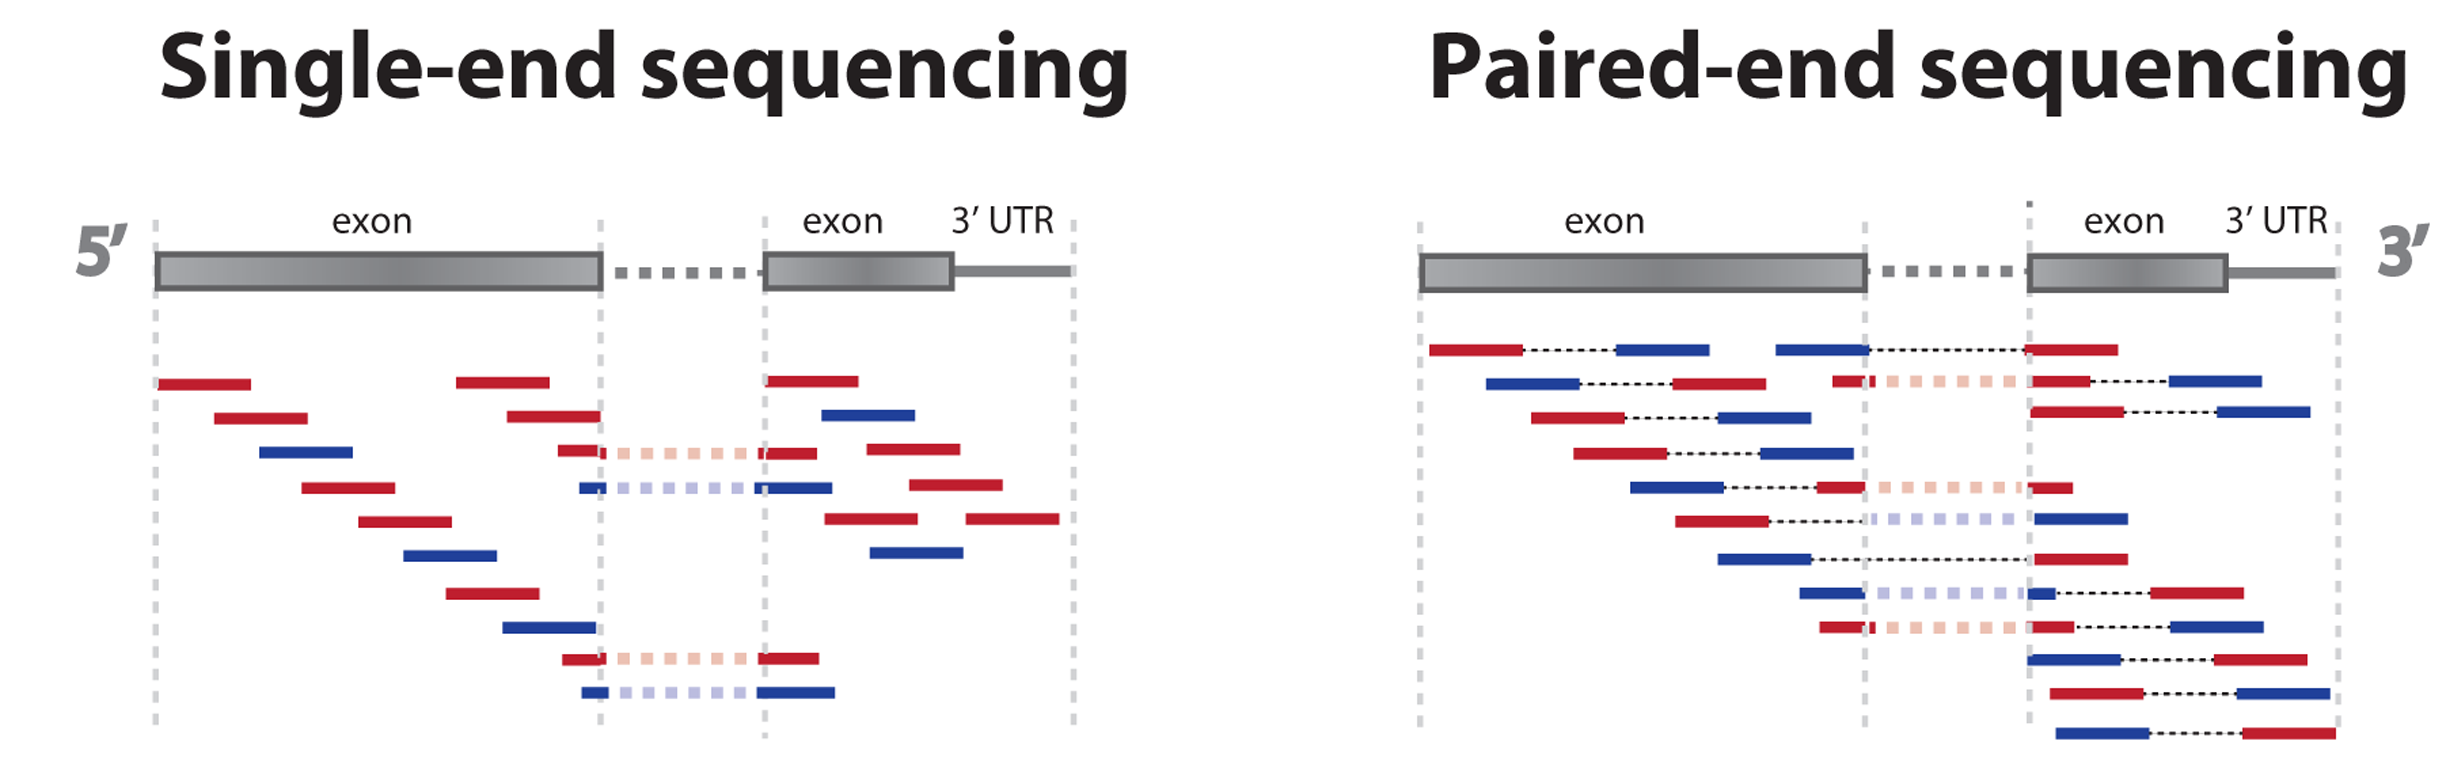 Figure: Single vs paired end sequencing. In contrast to single-end sequencing, paired-end sequencing allows users to sequence both ends of a fragment (Image adopted from Zhernakova et al., 2013, doi.org/10.1371/journal.pgen.1003594).